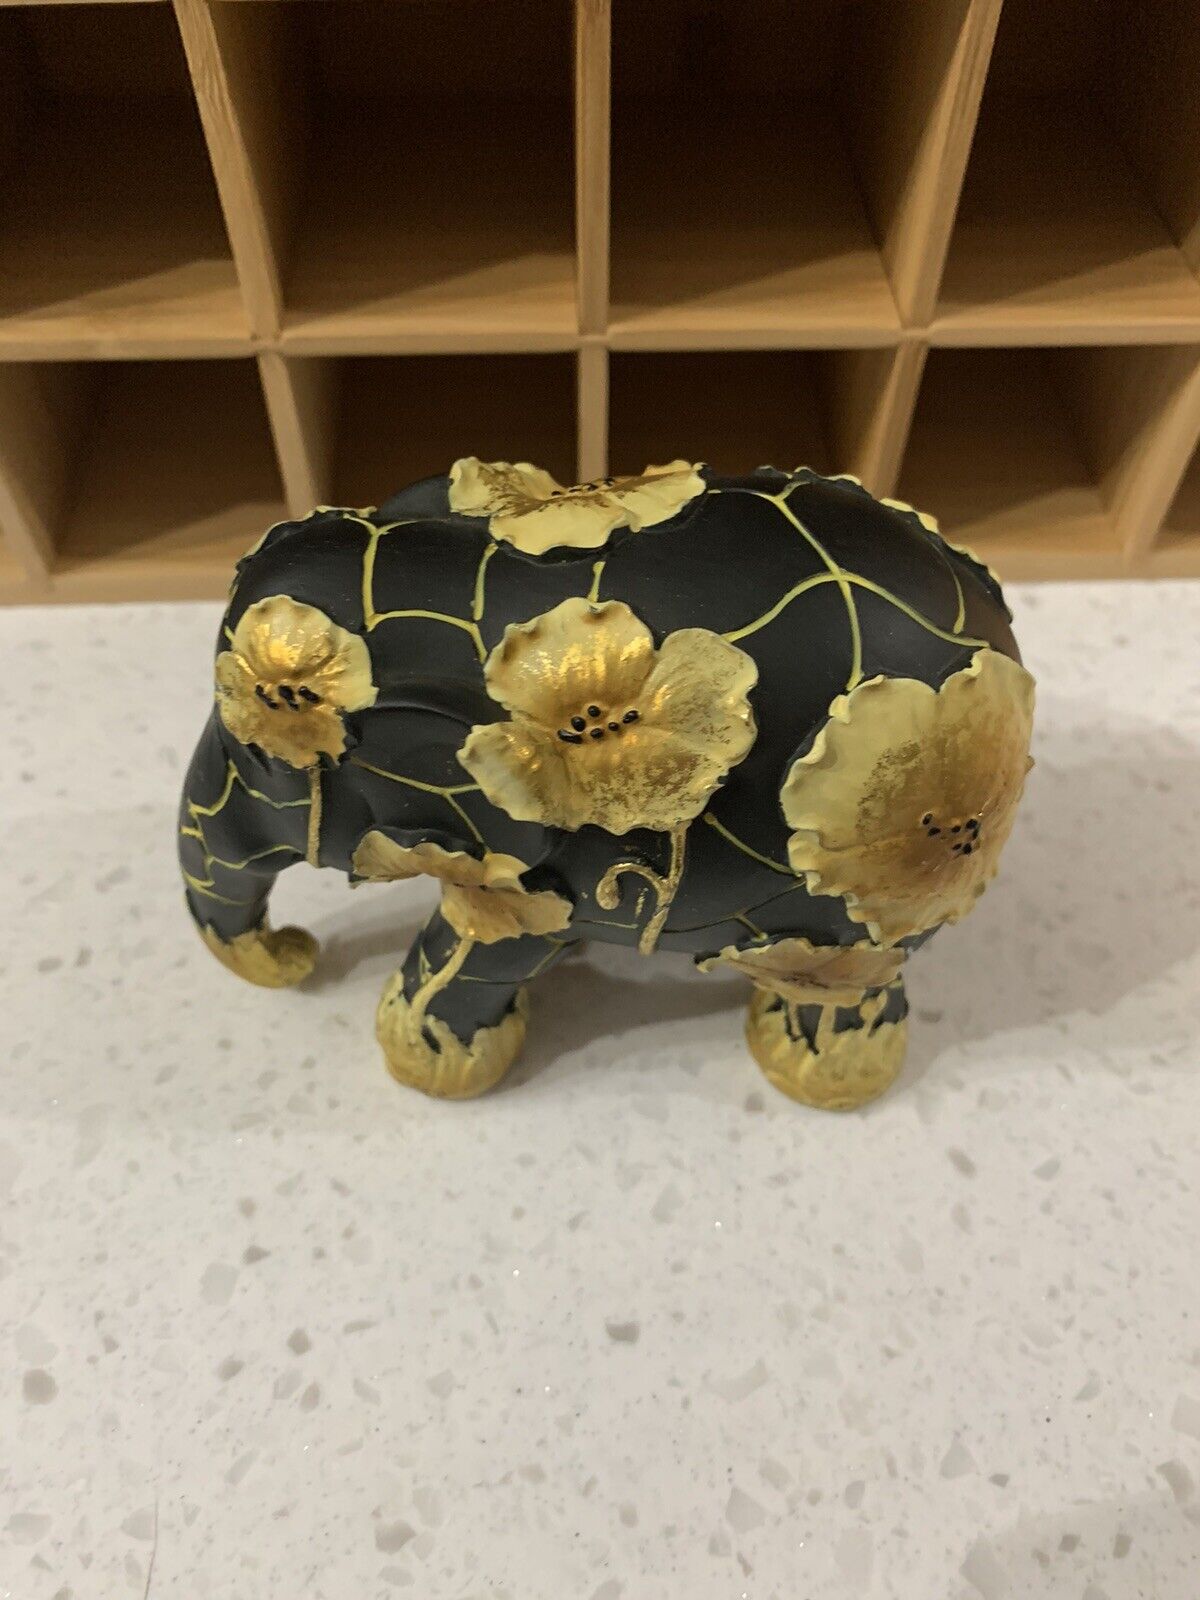 Elephant Parade GOLDEN POPPIES (24602) Limited 1,221 / 10,000, Westland Giftware